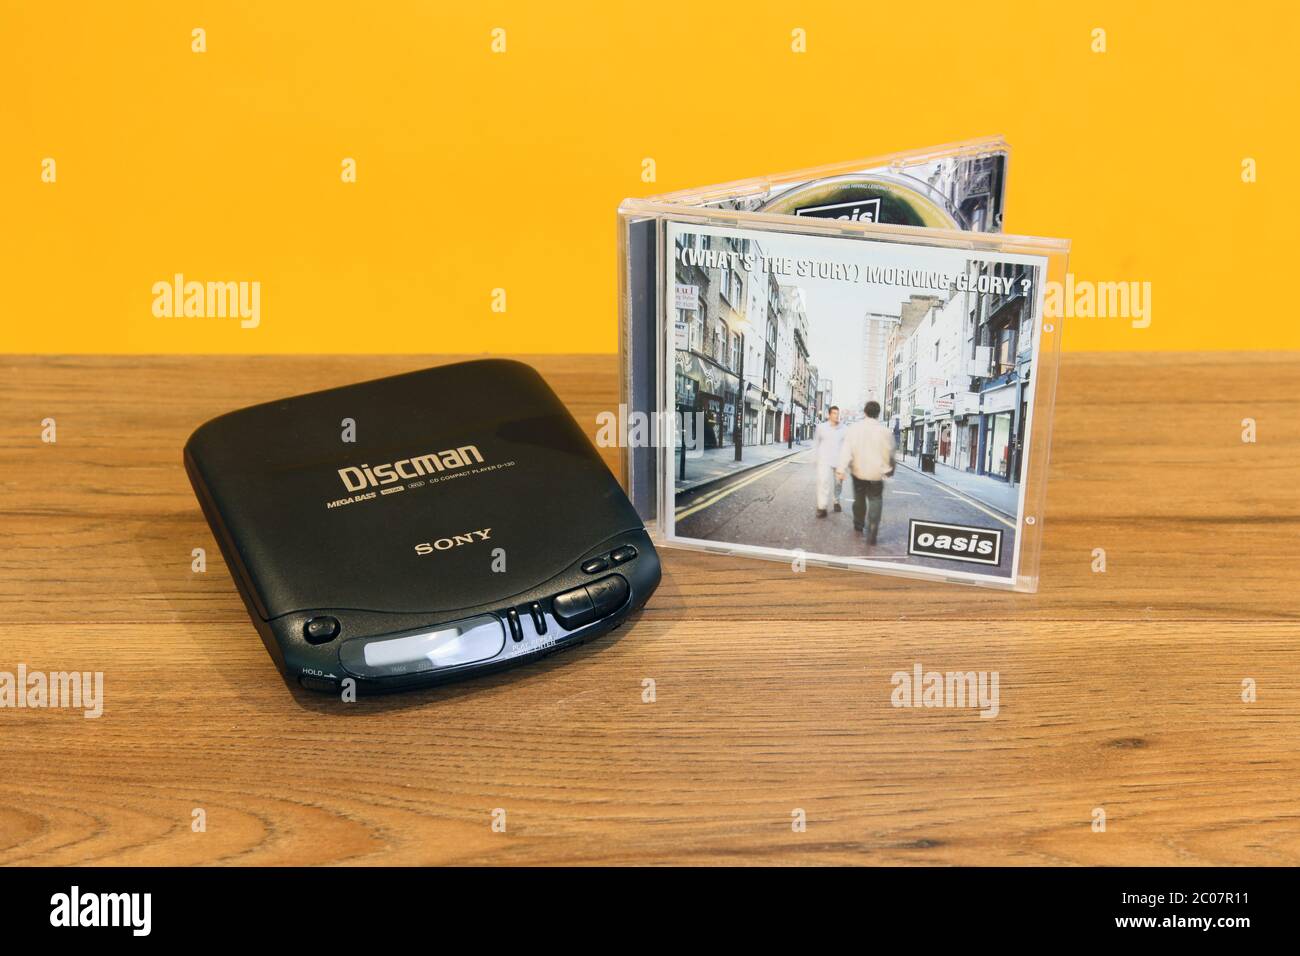 OASIS What's the Story Morning Glory 1995 CD album with a SONY Discman compact disc player Stock Photo